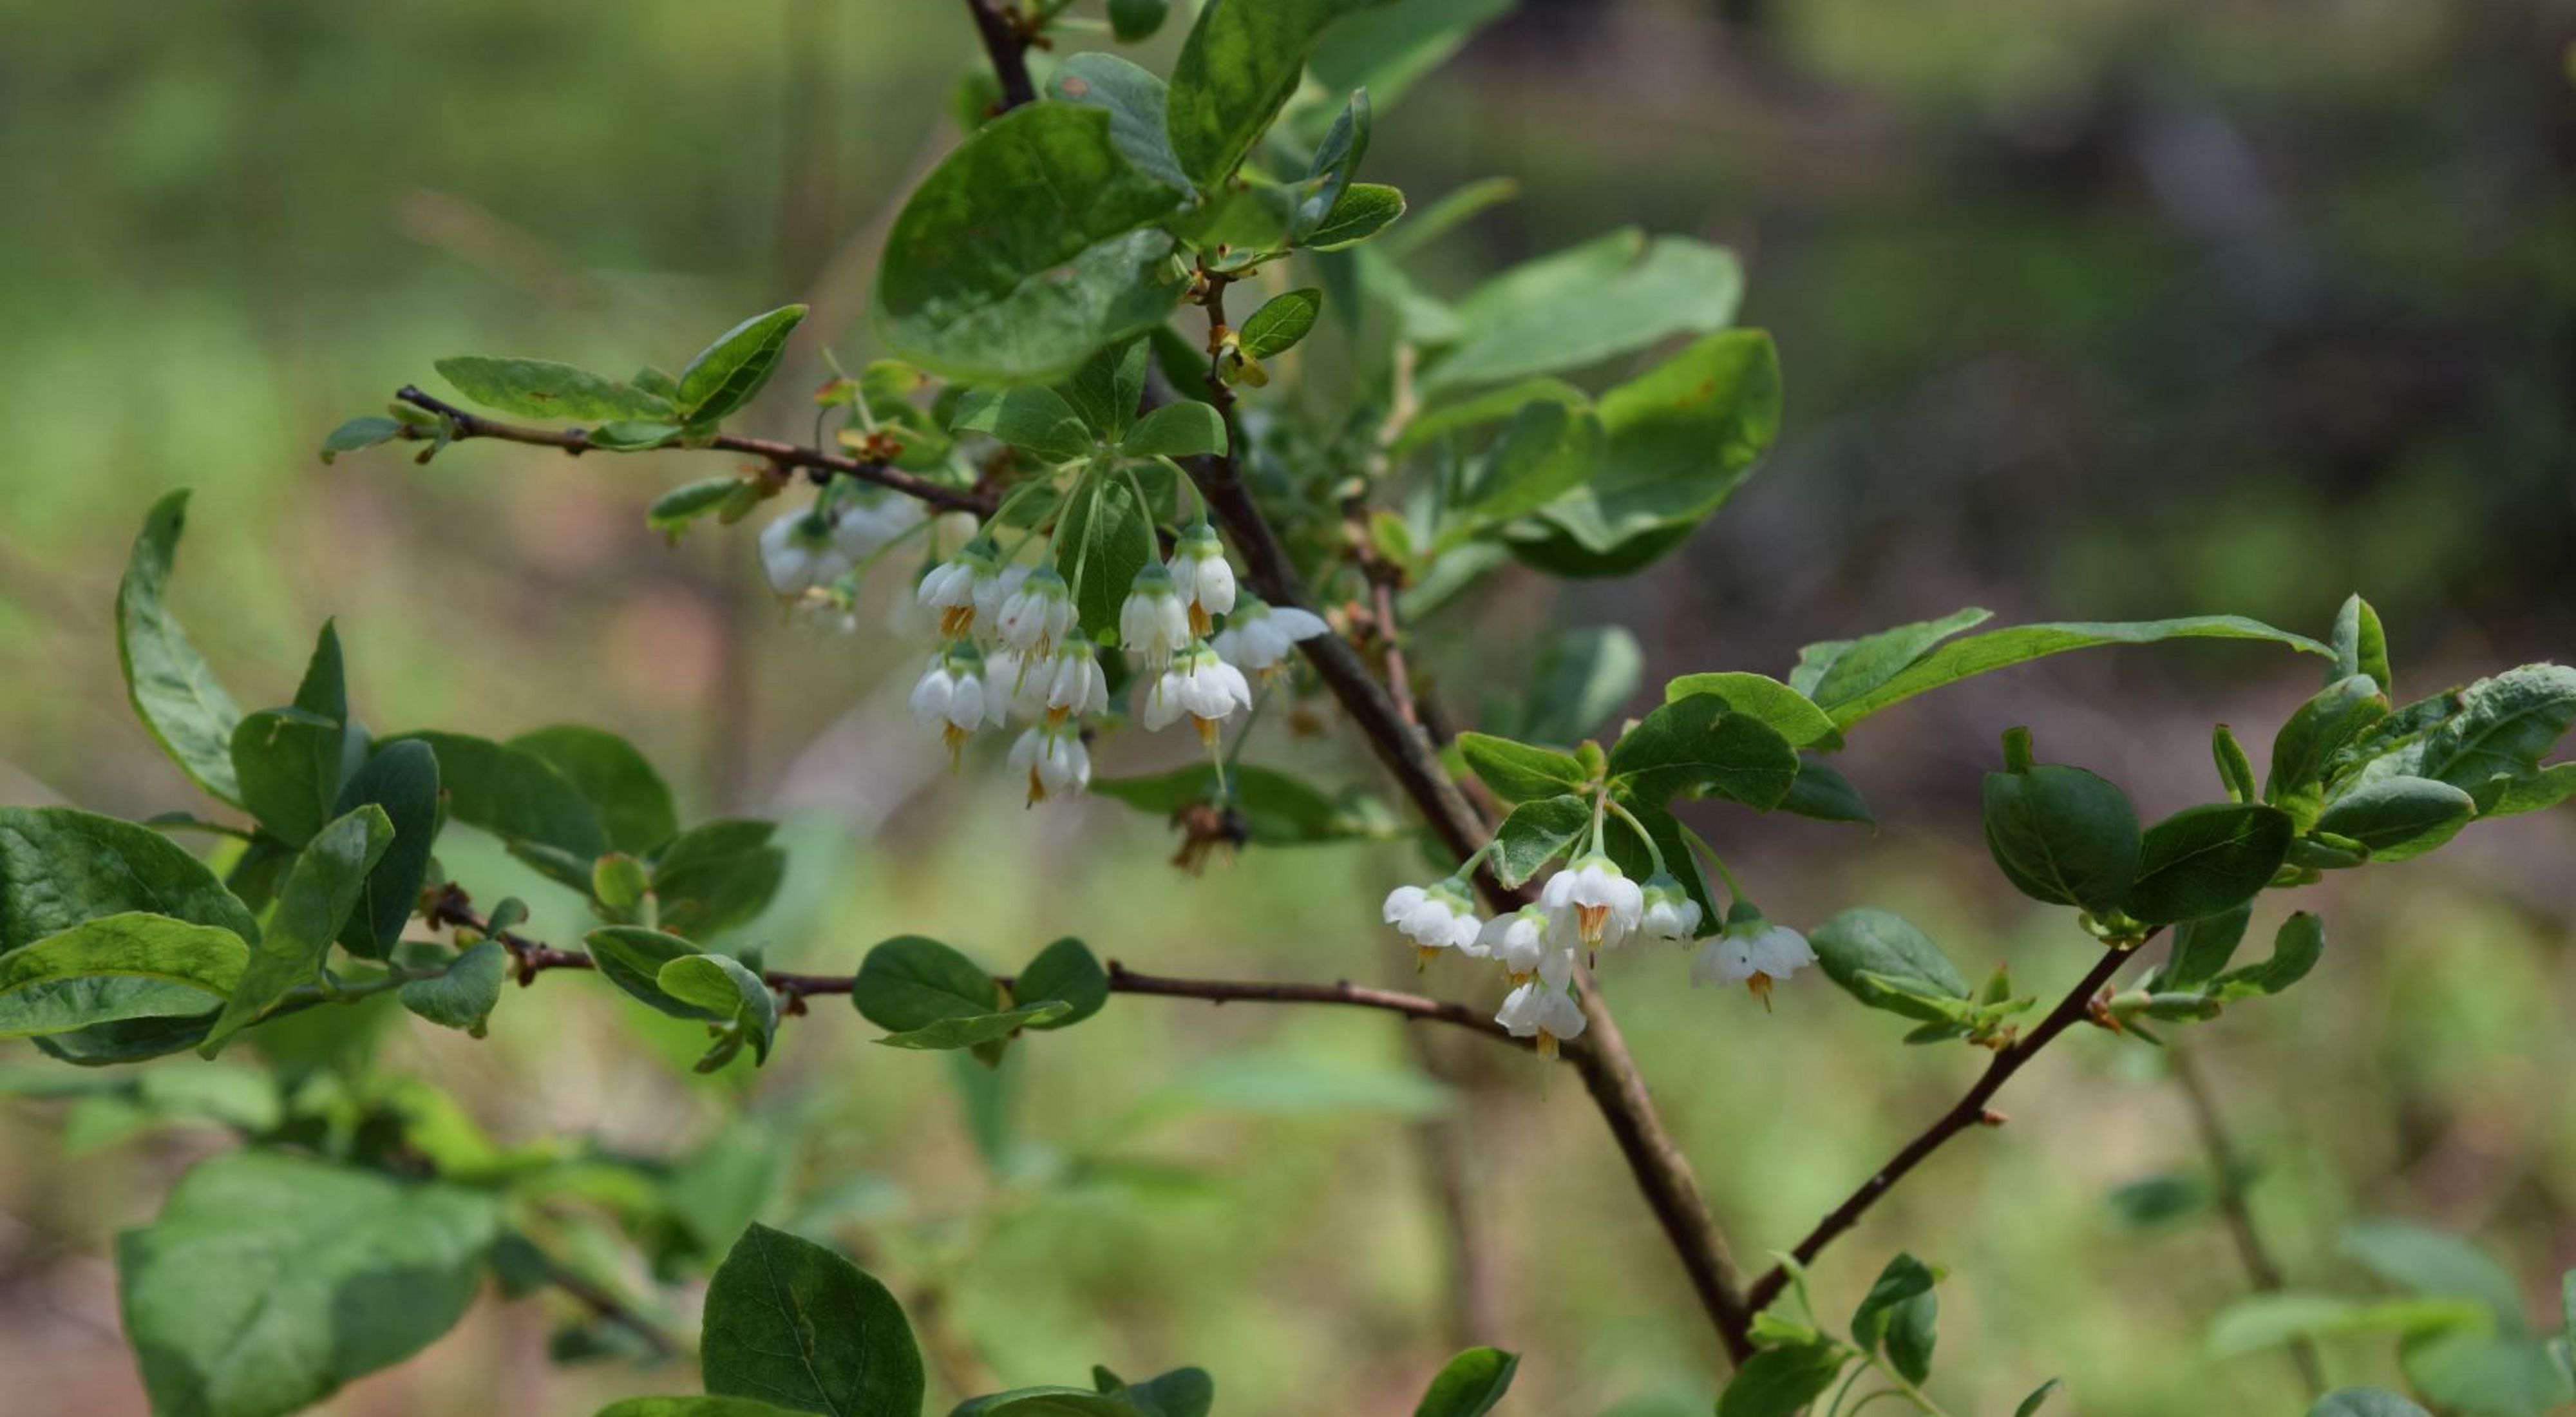 A bush grows with green leaves and downturned white flowers on its branches. 